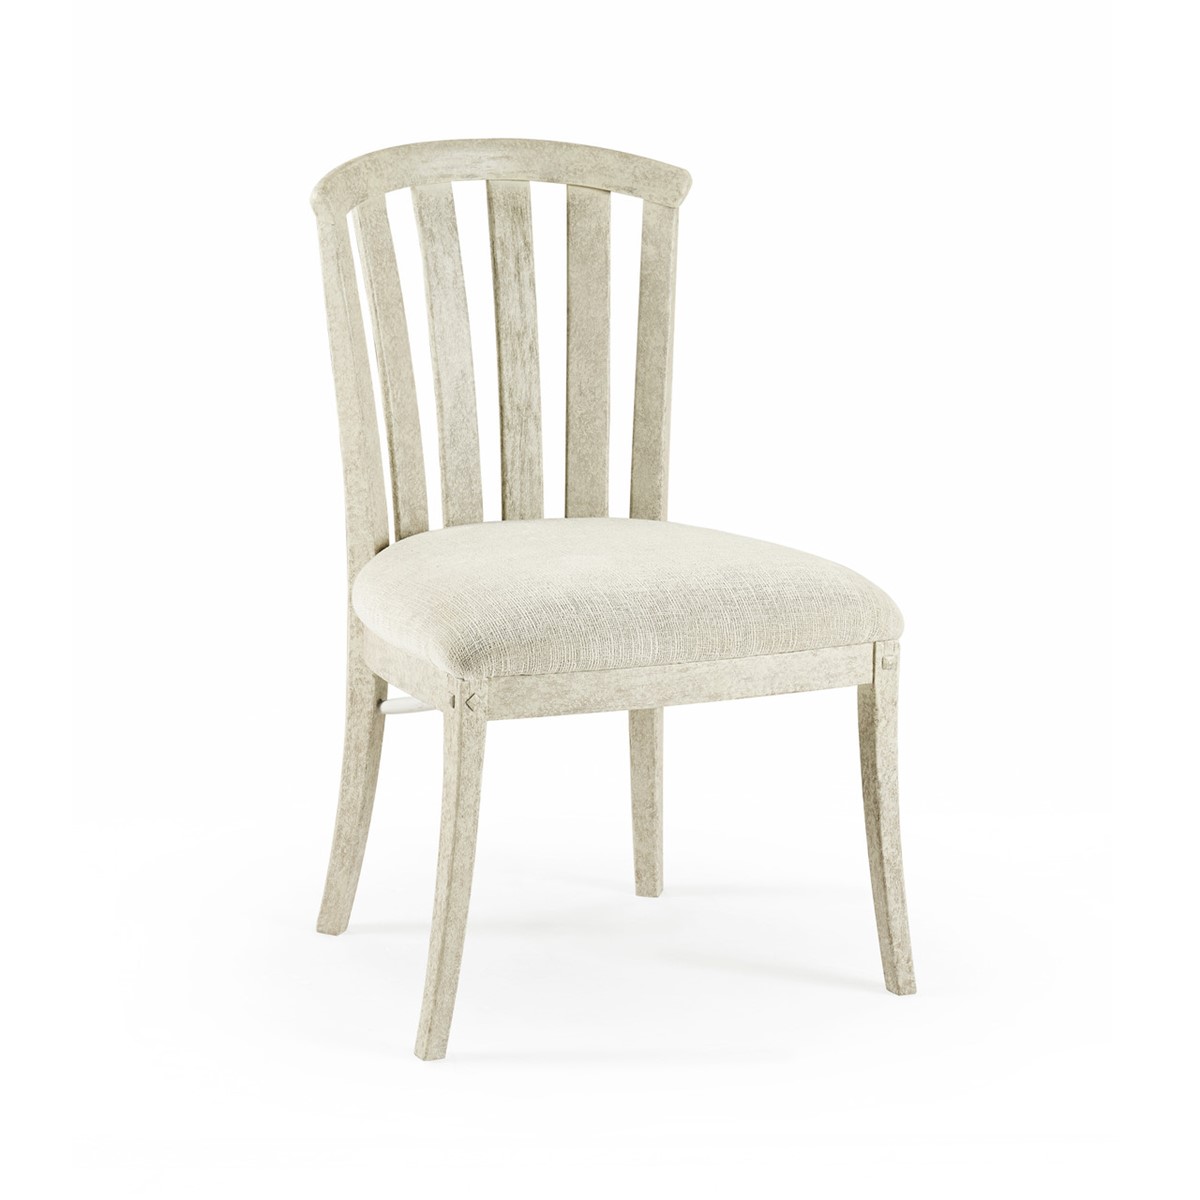 Casual Accents Whitewash Curved Back Chair